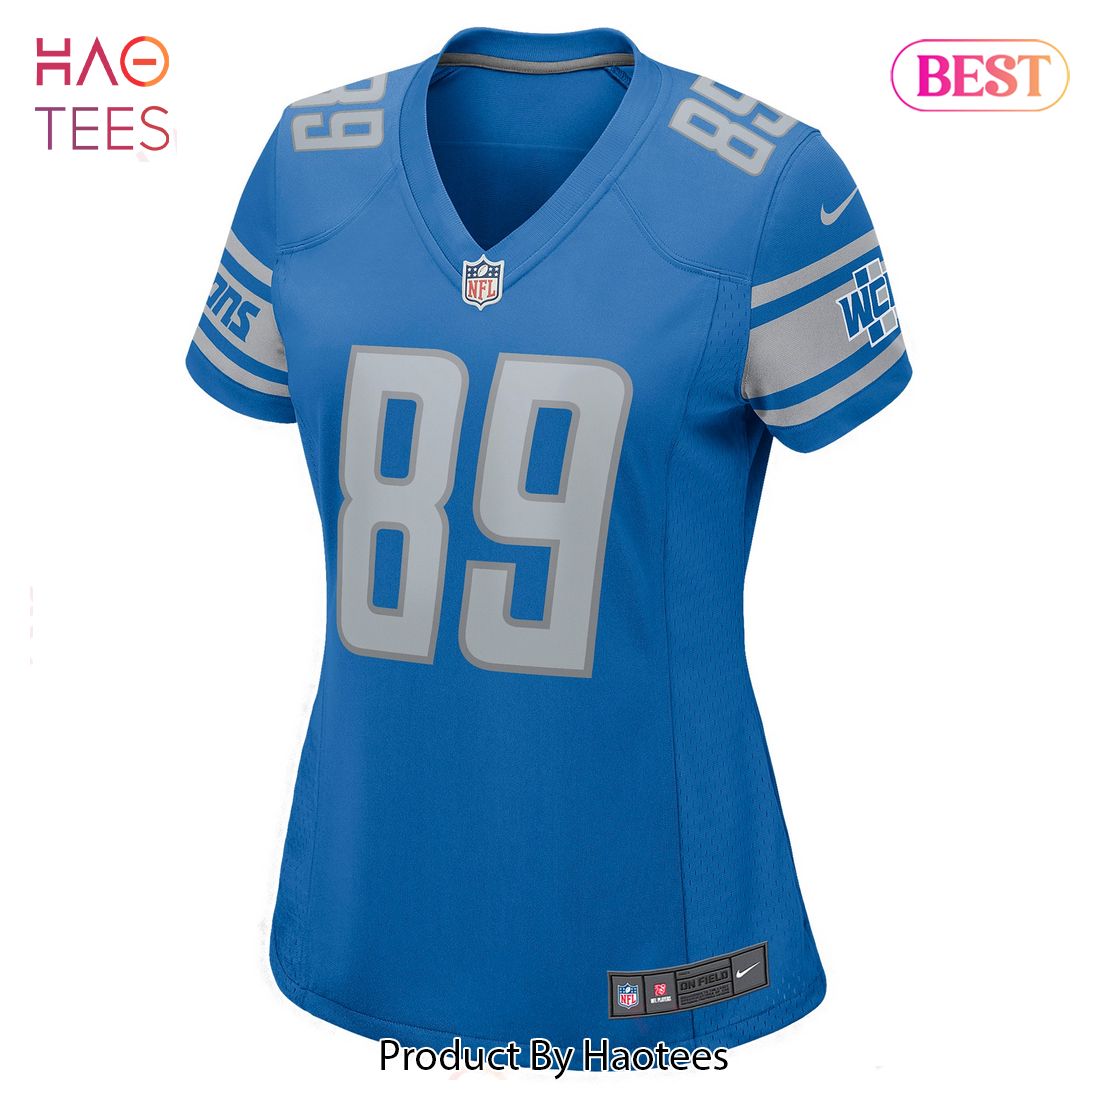 Dan Campbell Detroit Lions Nike Women's Retired Player Game Jersey Blue